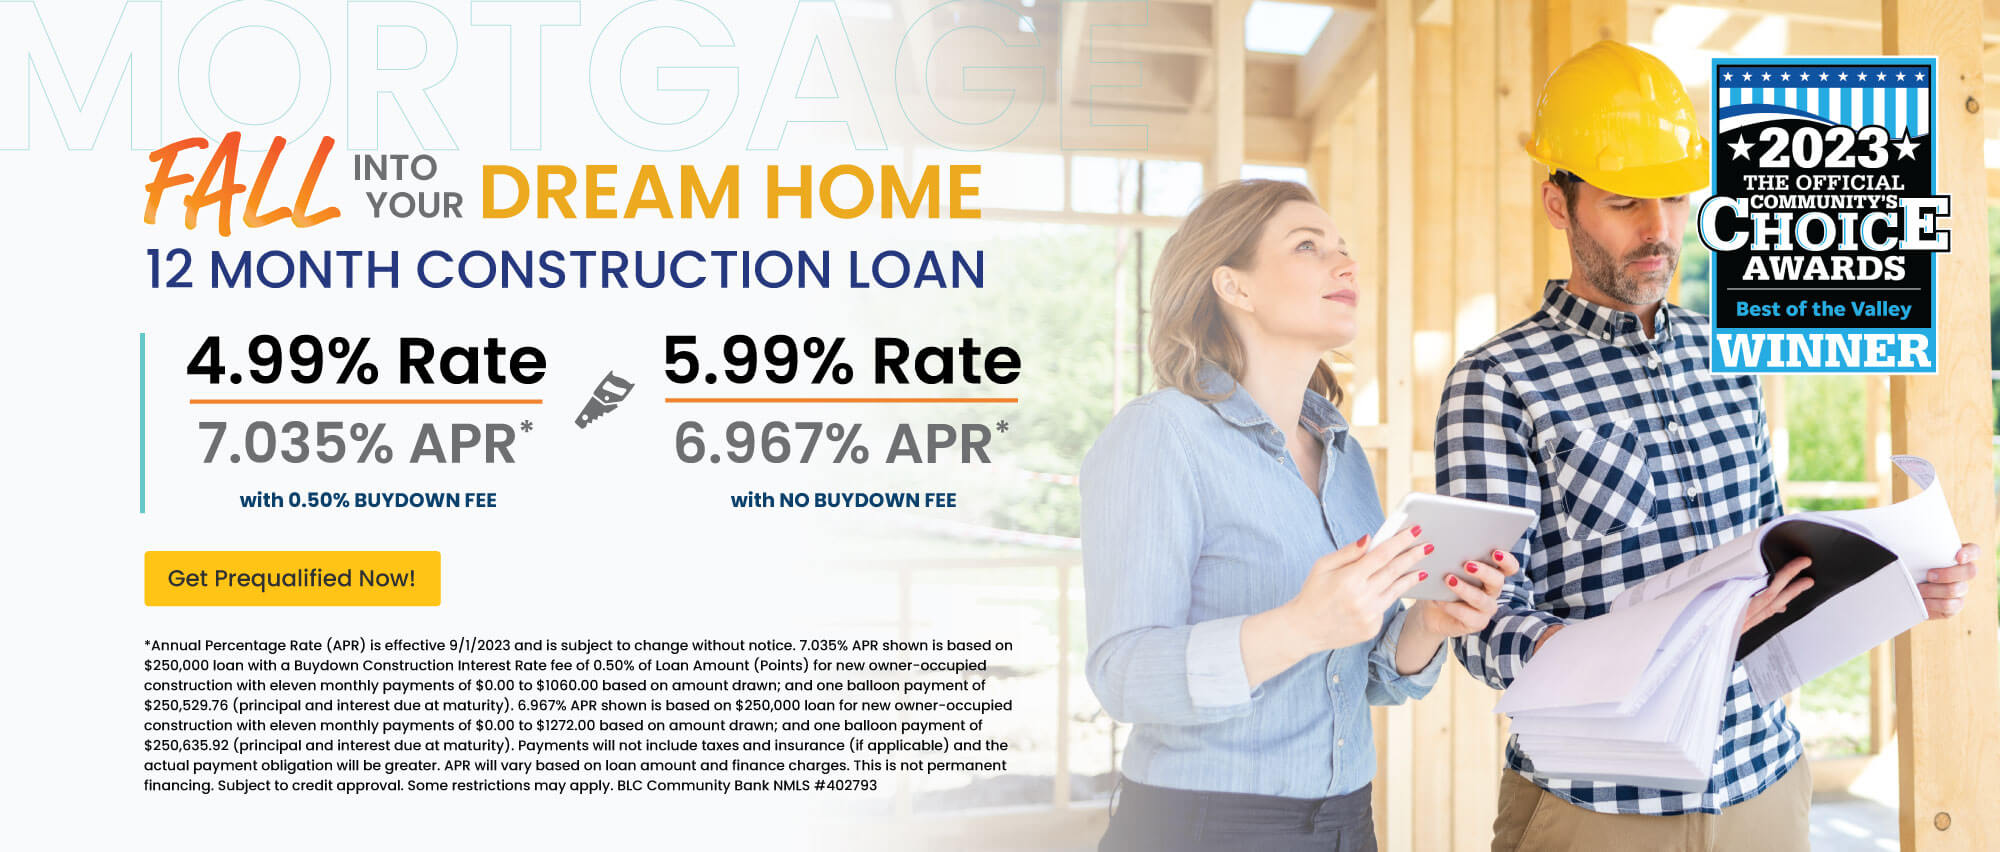 Fall into your dream home with a 12 month construction loan. 4.99% Rate | 7.035% APR with 0.50% Buydown Fee. 5.99% Rate | 6.967% APR with No Buydown Fee. Every home starts with a good foundation. Turn your plans into your dream home! Get prequalified now!